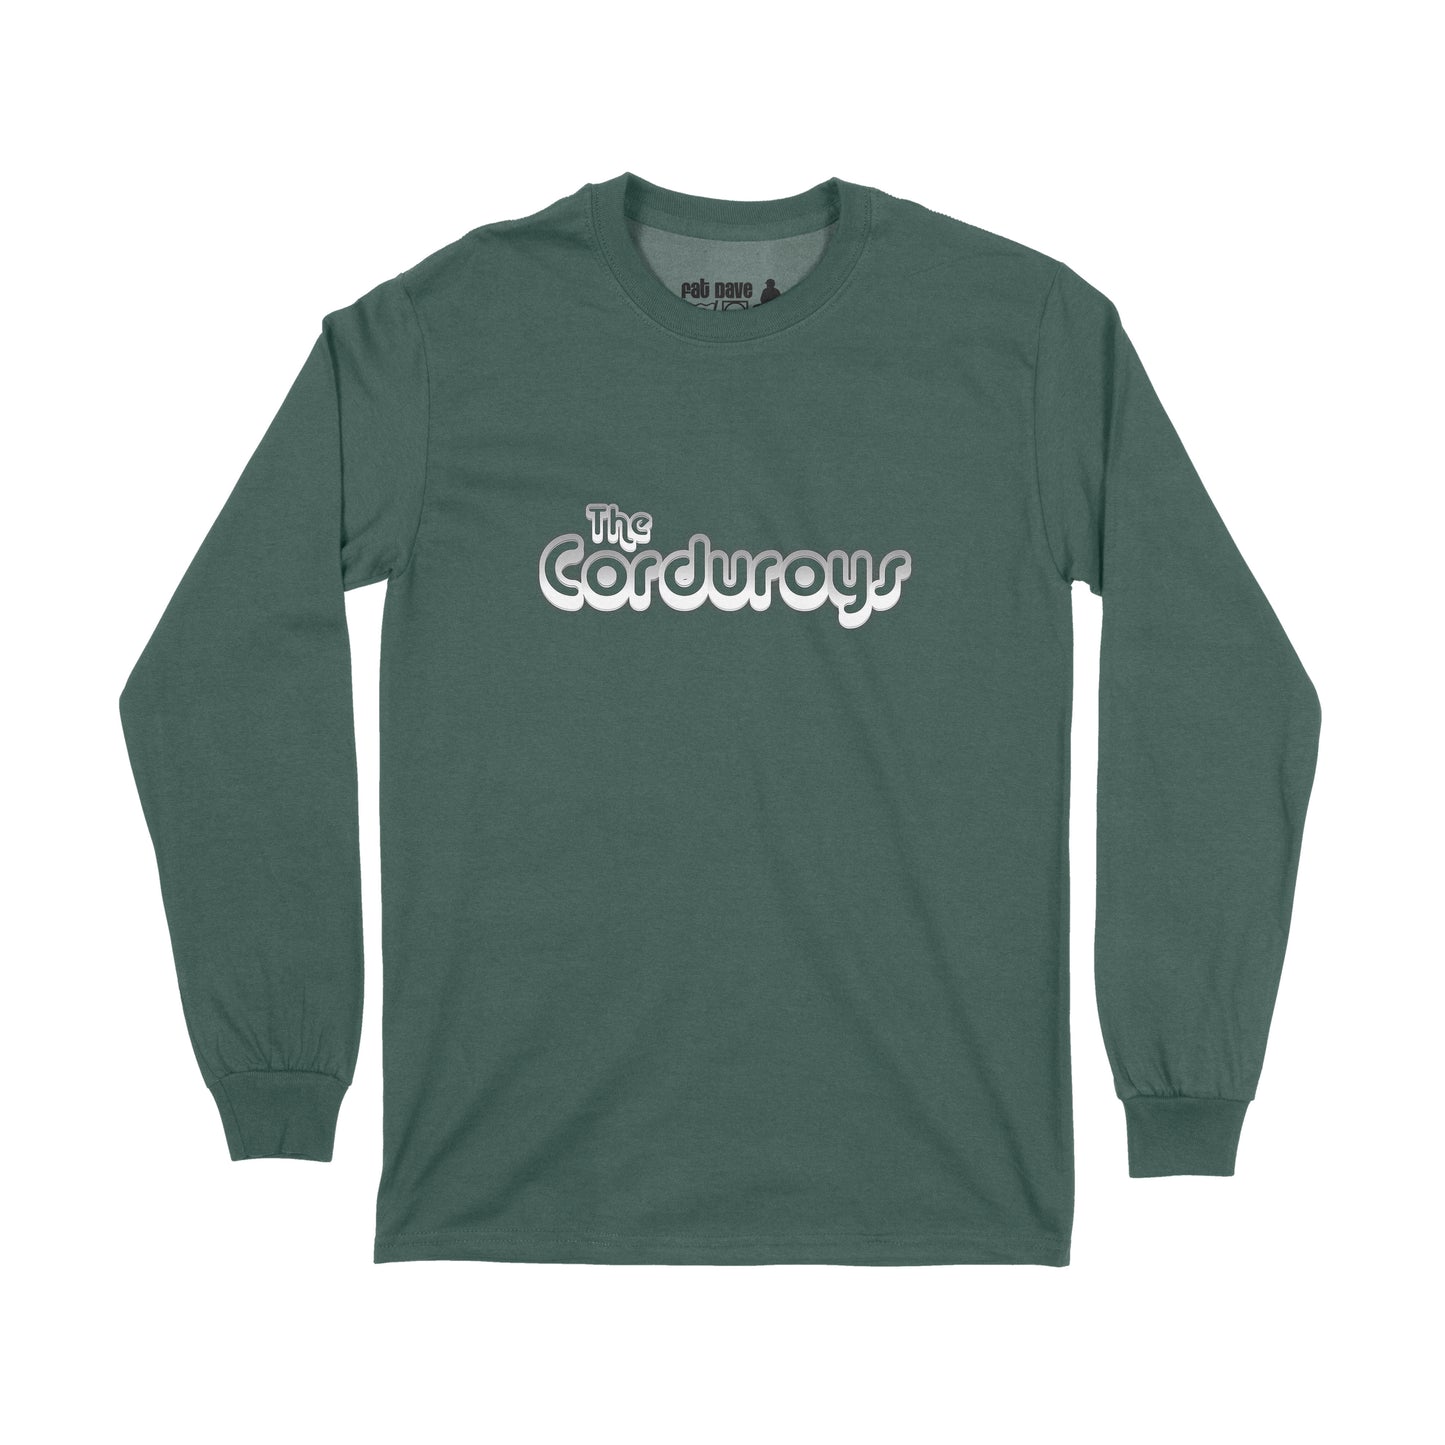 Brantford, Fat Dave, Long Sleeve T-Shirt, Musician, The Corduroys, Forest Green